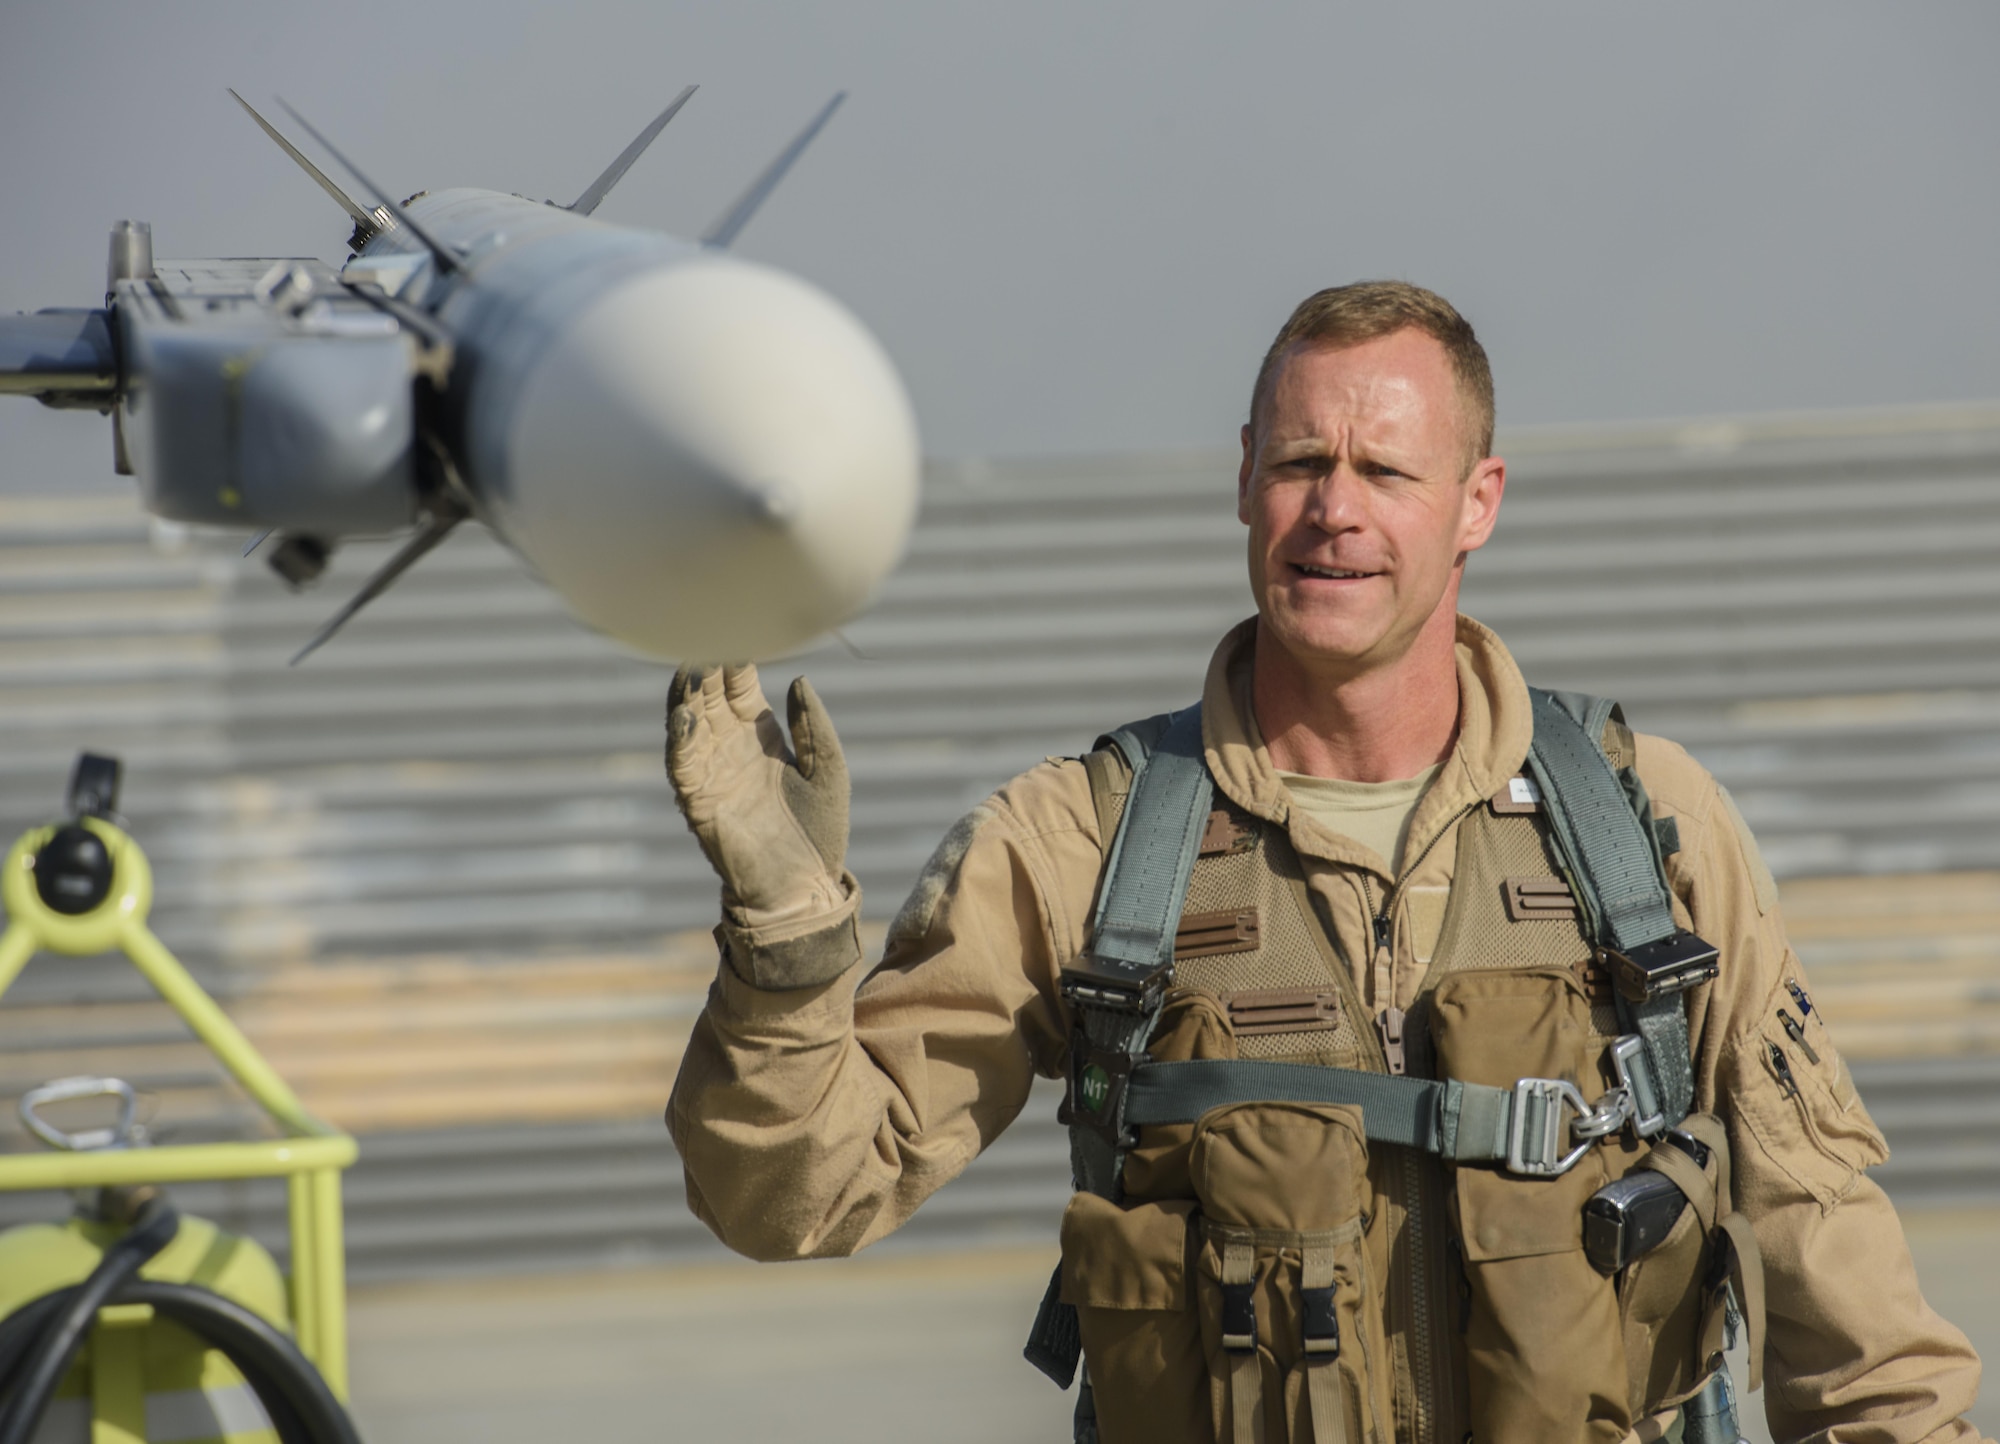 Brig. Gen. Jim Sears, commander of the 455th Air Expeditionary Wing, conducts pre-flight checks prior to his fini flight at Bagram Airfield, Afghanistan, May 22, 2017. During the flight, Sears patrolled the skies with his wingman, engaging enemy ground forces from above to support coalition and Afghan troops. (U.S. Air Force photo by Staff Sgt. Benjamin Gonsier)